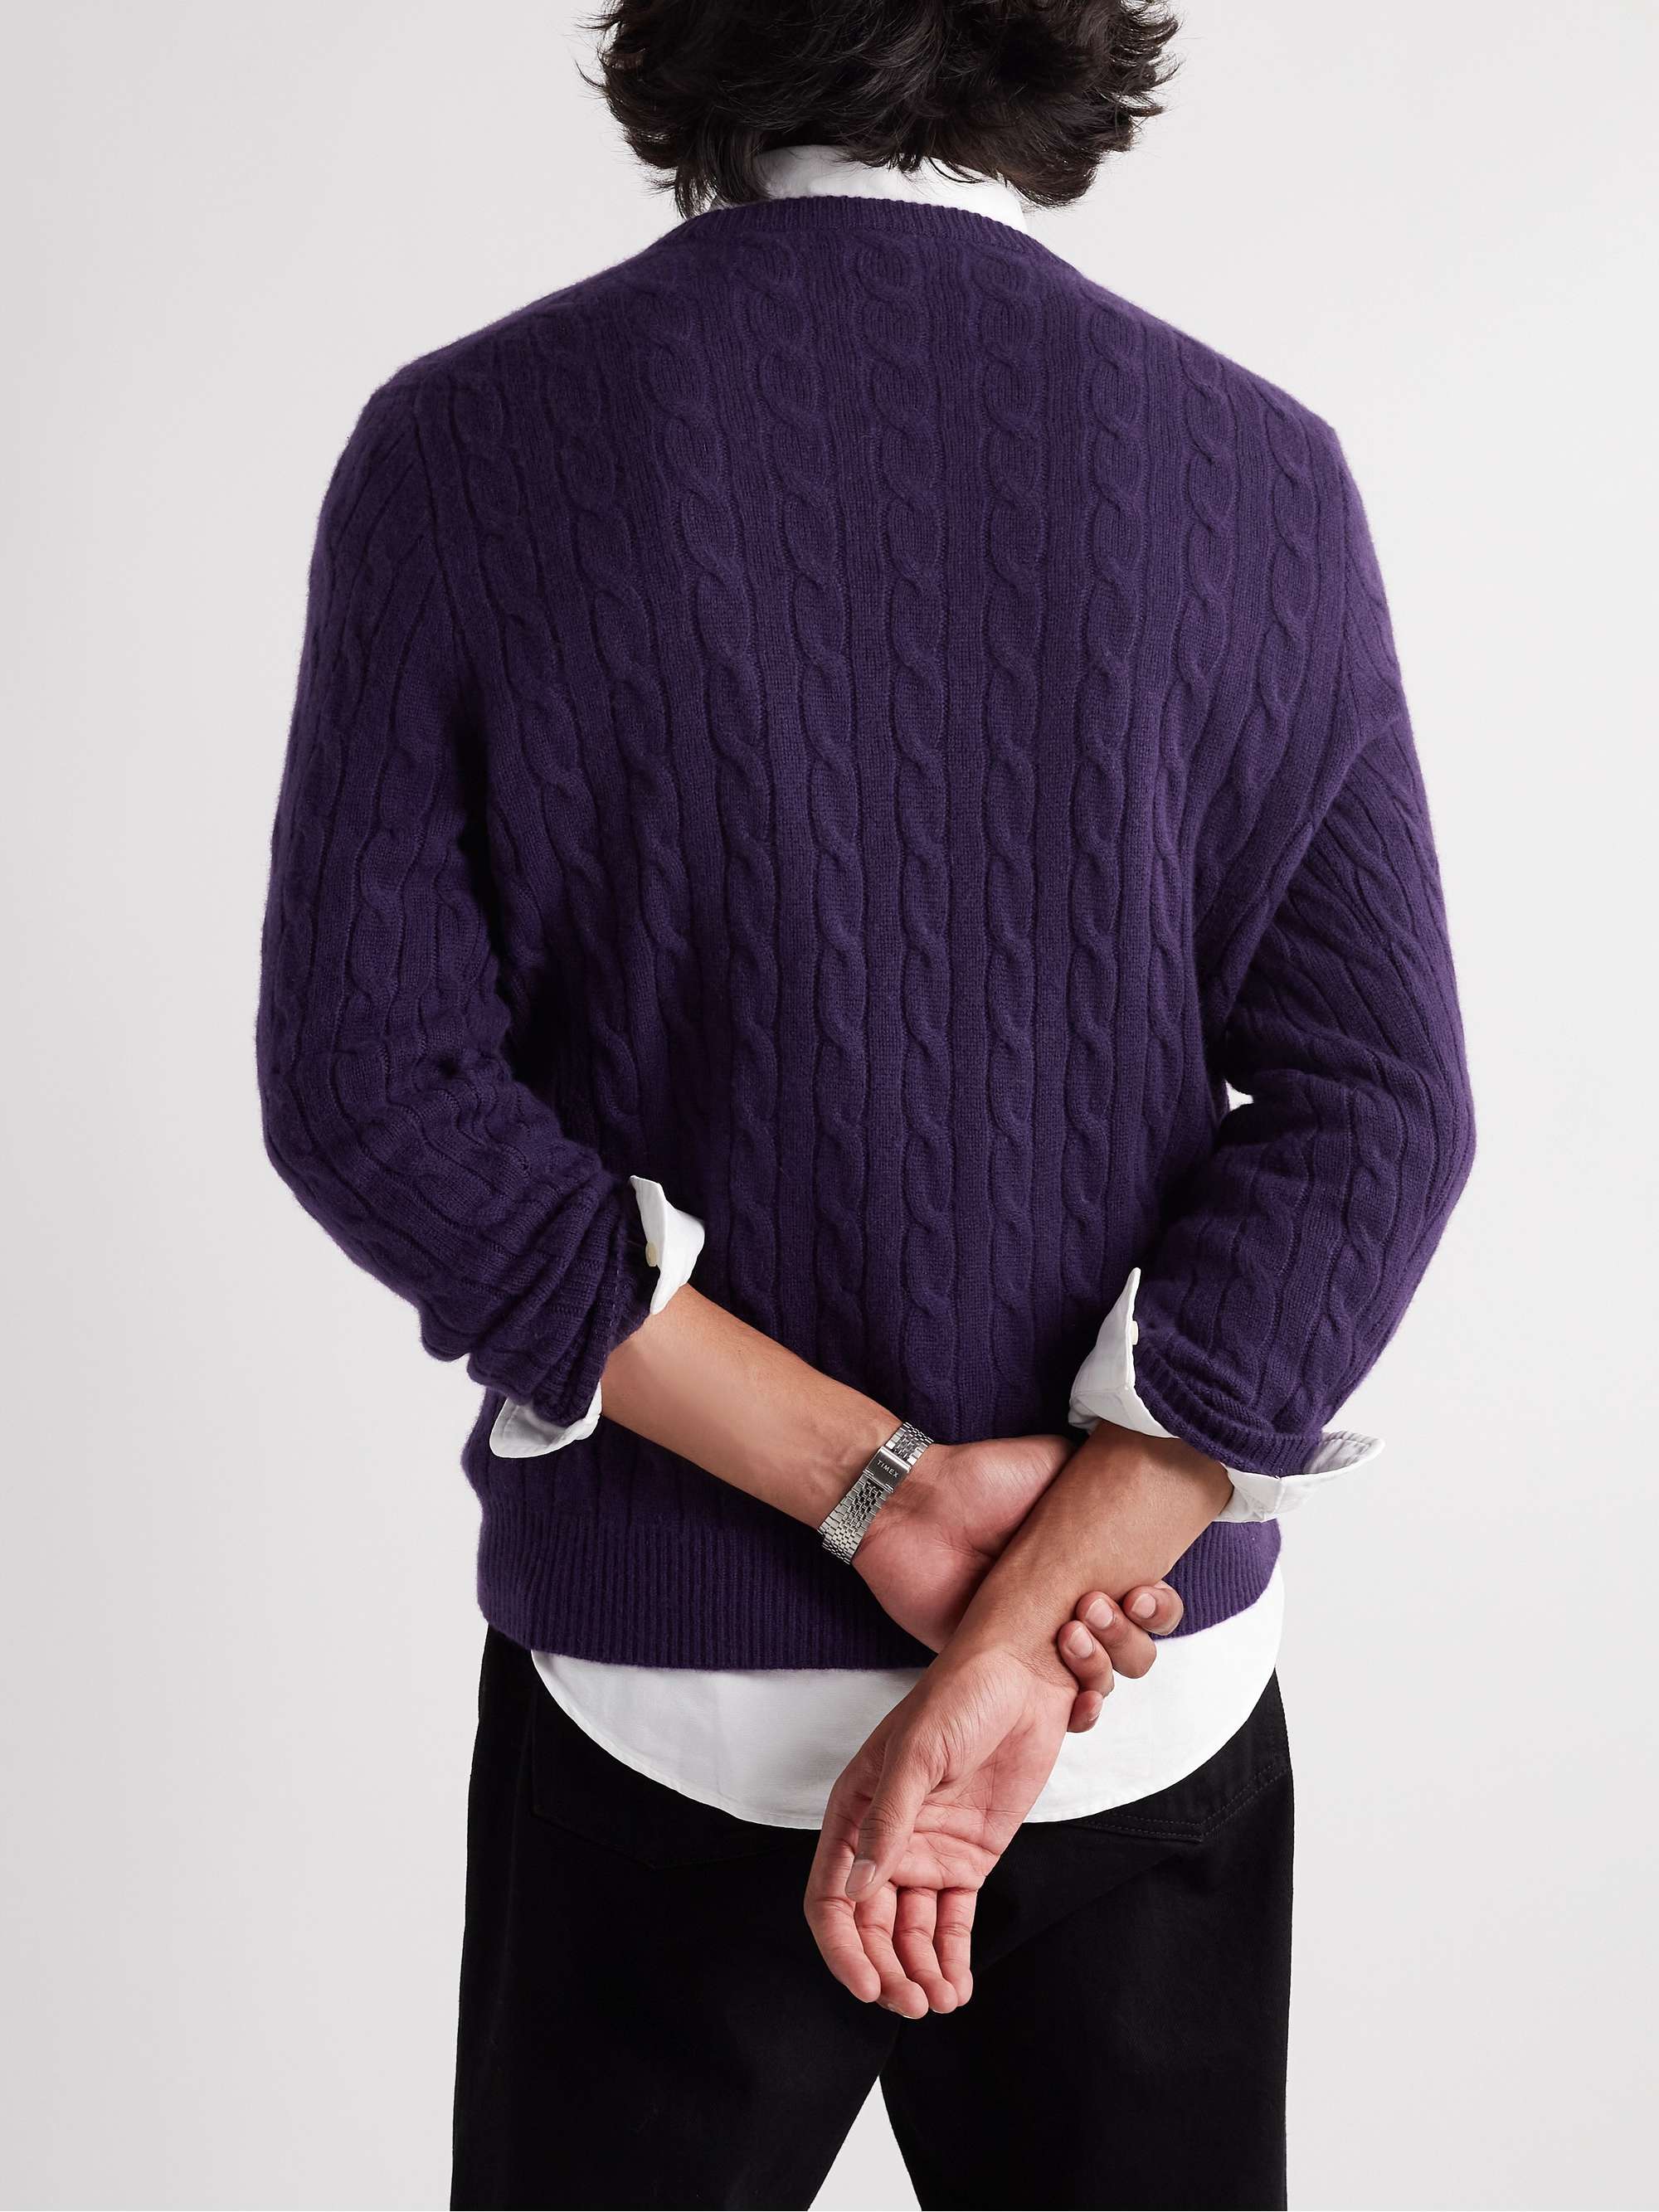 J.CREW Slim-Fit Cable-Knit Cashmere Sweater